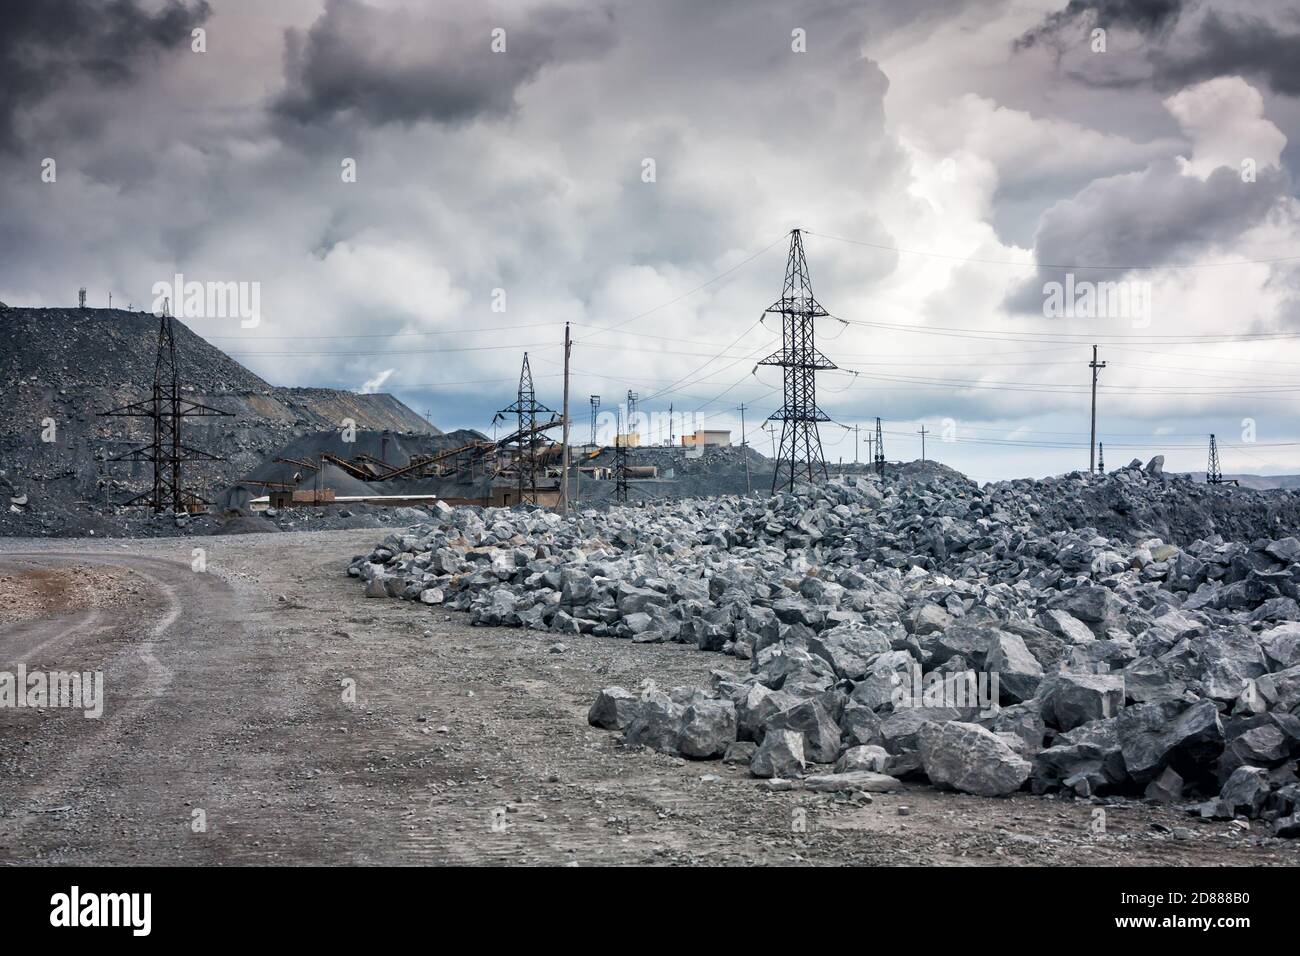 Stone dumps, power lines and crushing machines in a quarry in cloudy weather Stock Photo